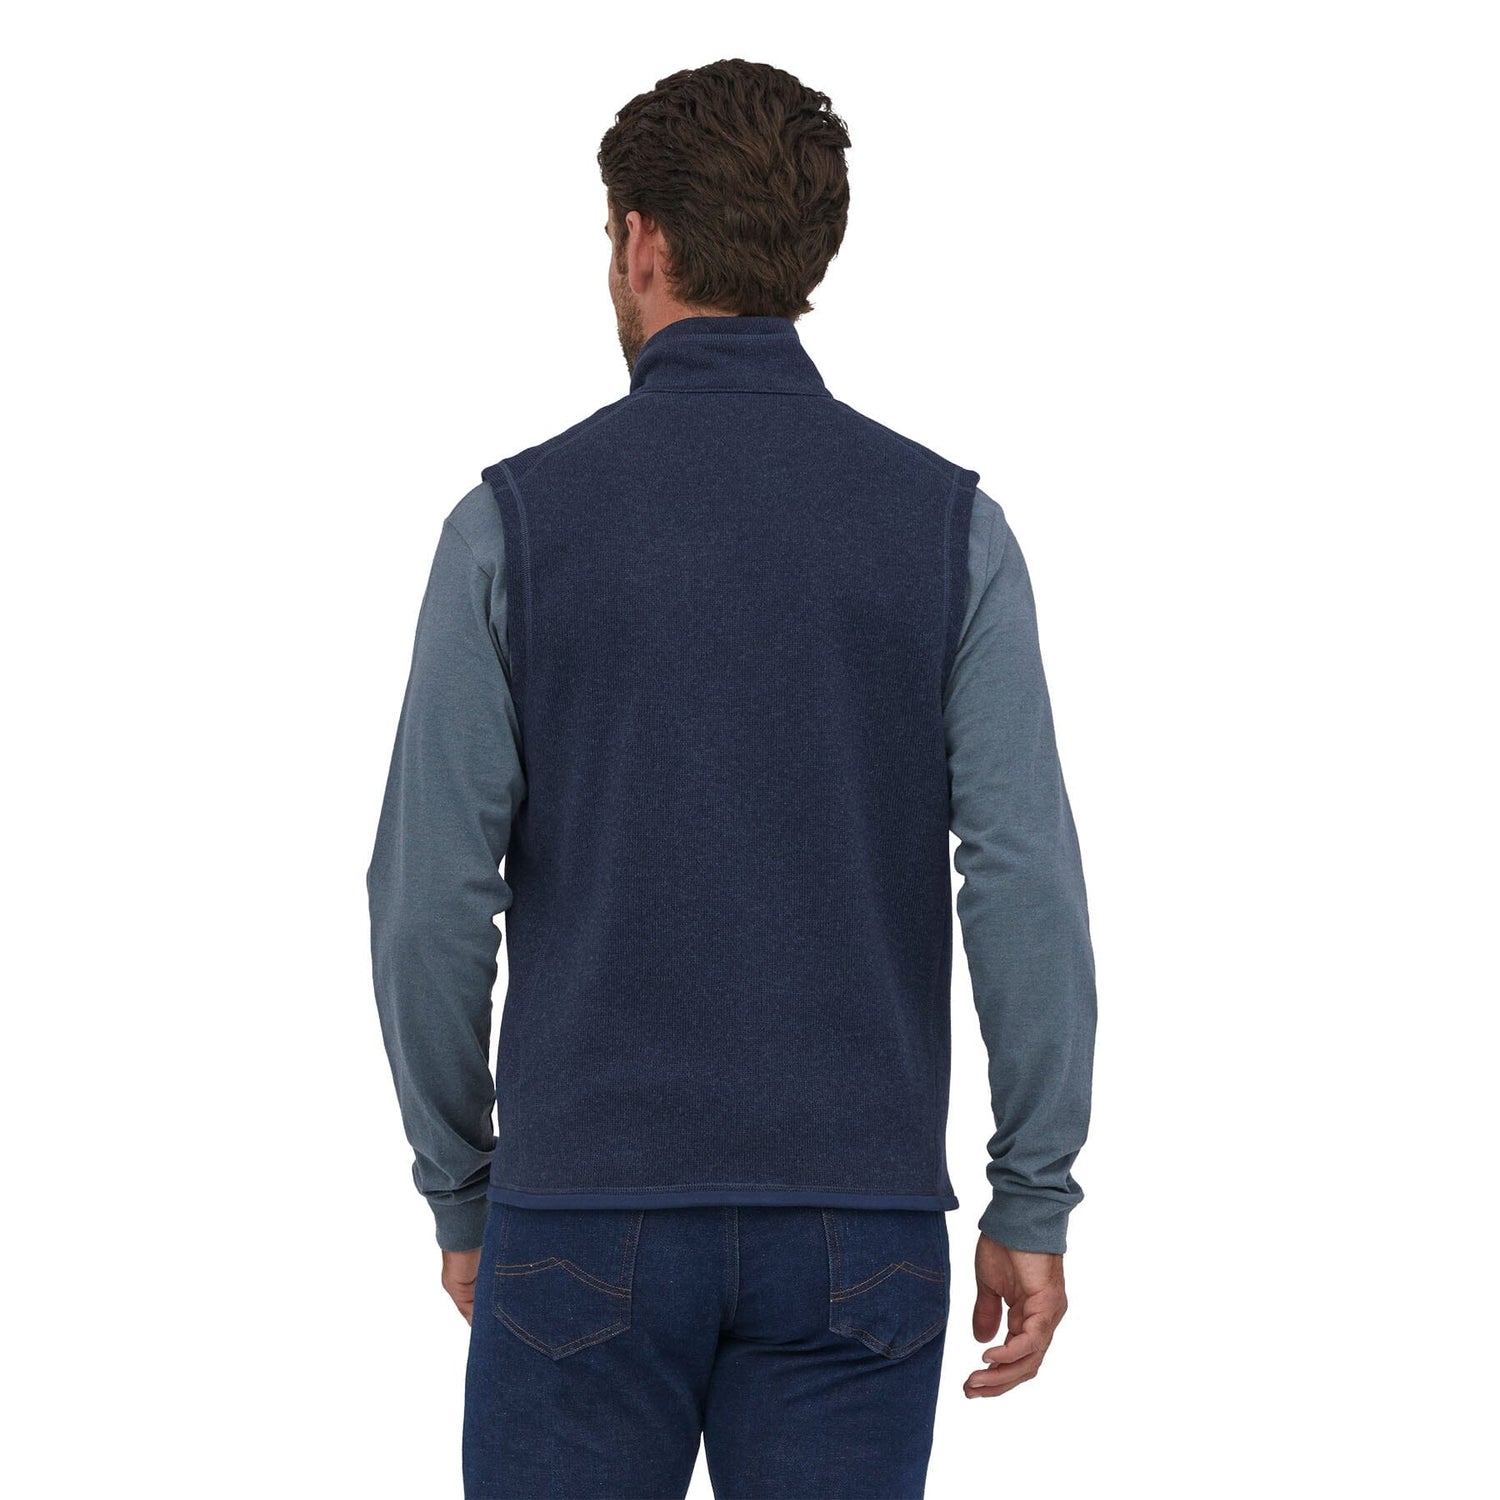 Patagonia - M's Better Sweater Vest - 100% recycled polyester - Weekendbee - sustainable sportswear